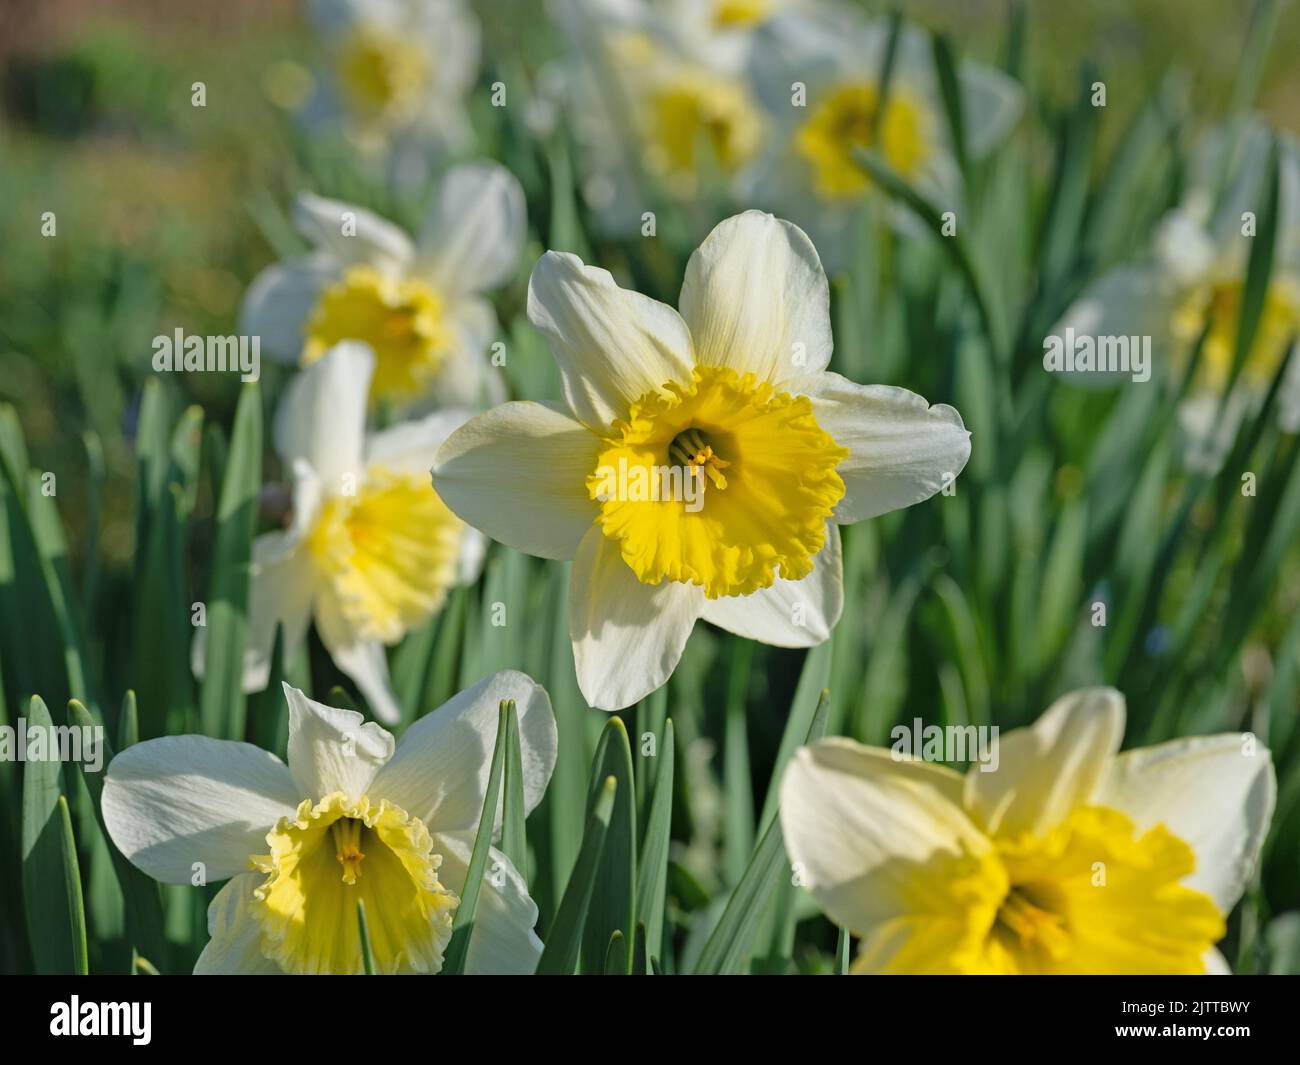 Flowering daffodils, Narcissus, in spring Stock Photo